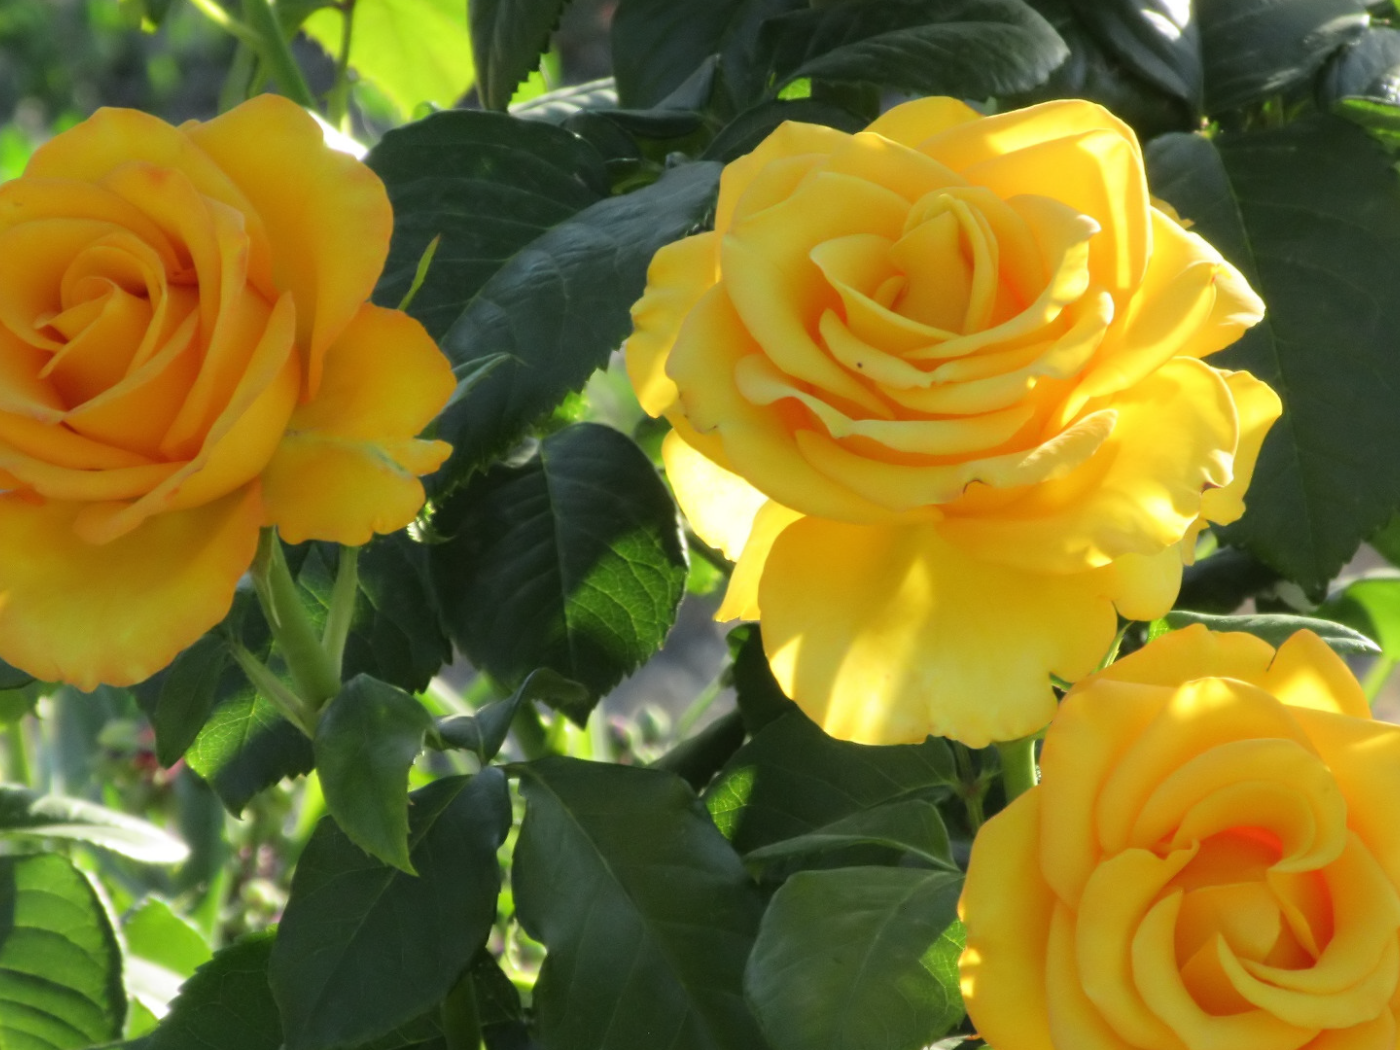 Three beautiful delicate yellow roses on a bed